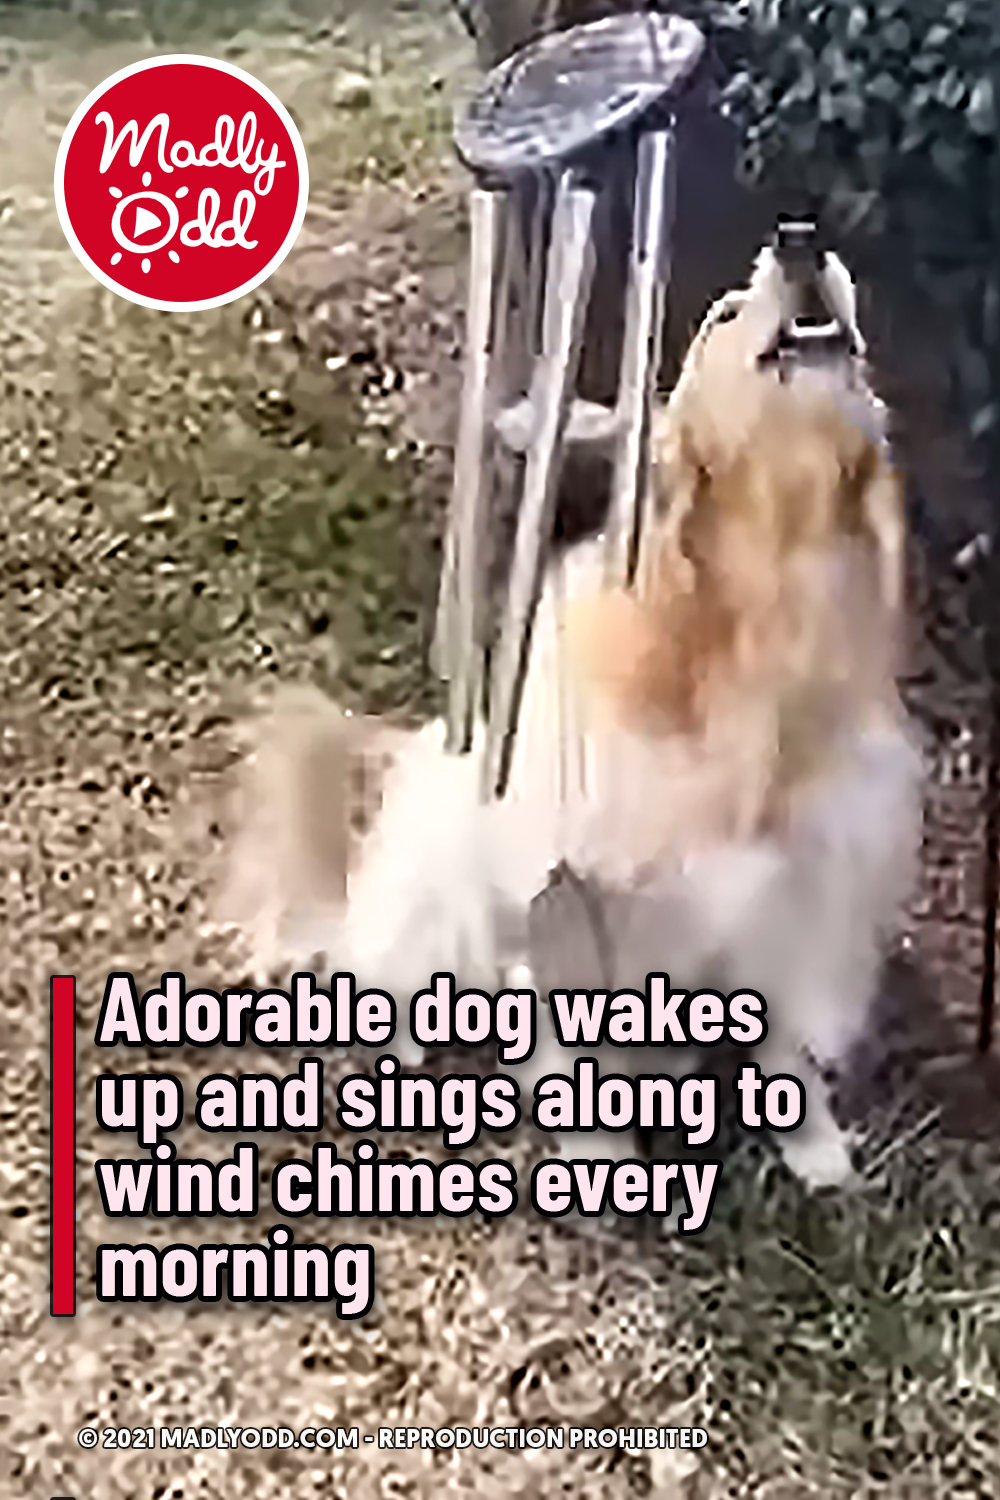 Adorable dog wakes up and sings along to wind chimes every morning